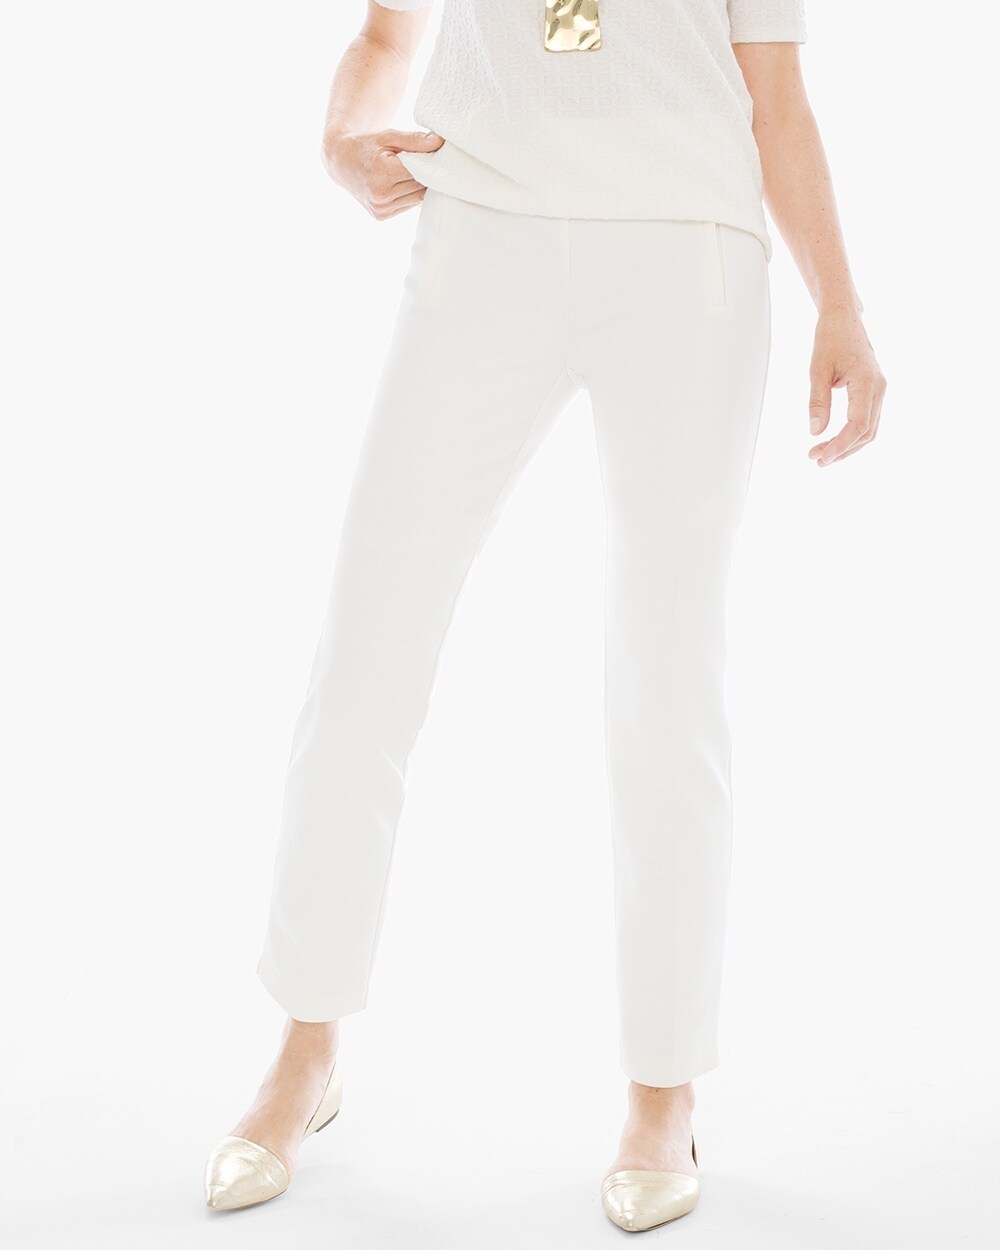 Juliet Ankle Pants in Cocoa Bean